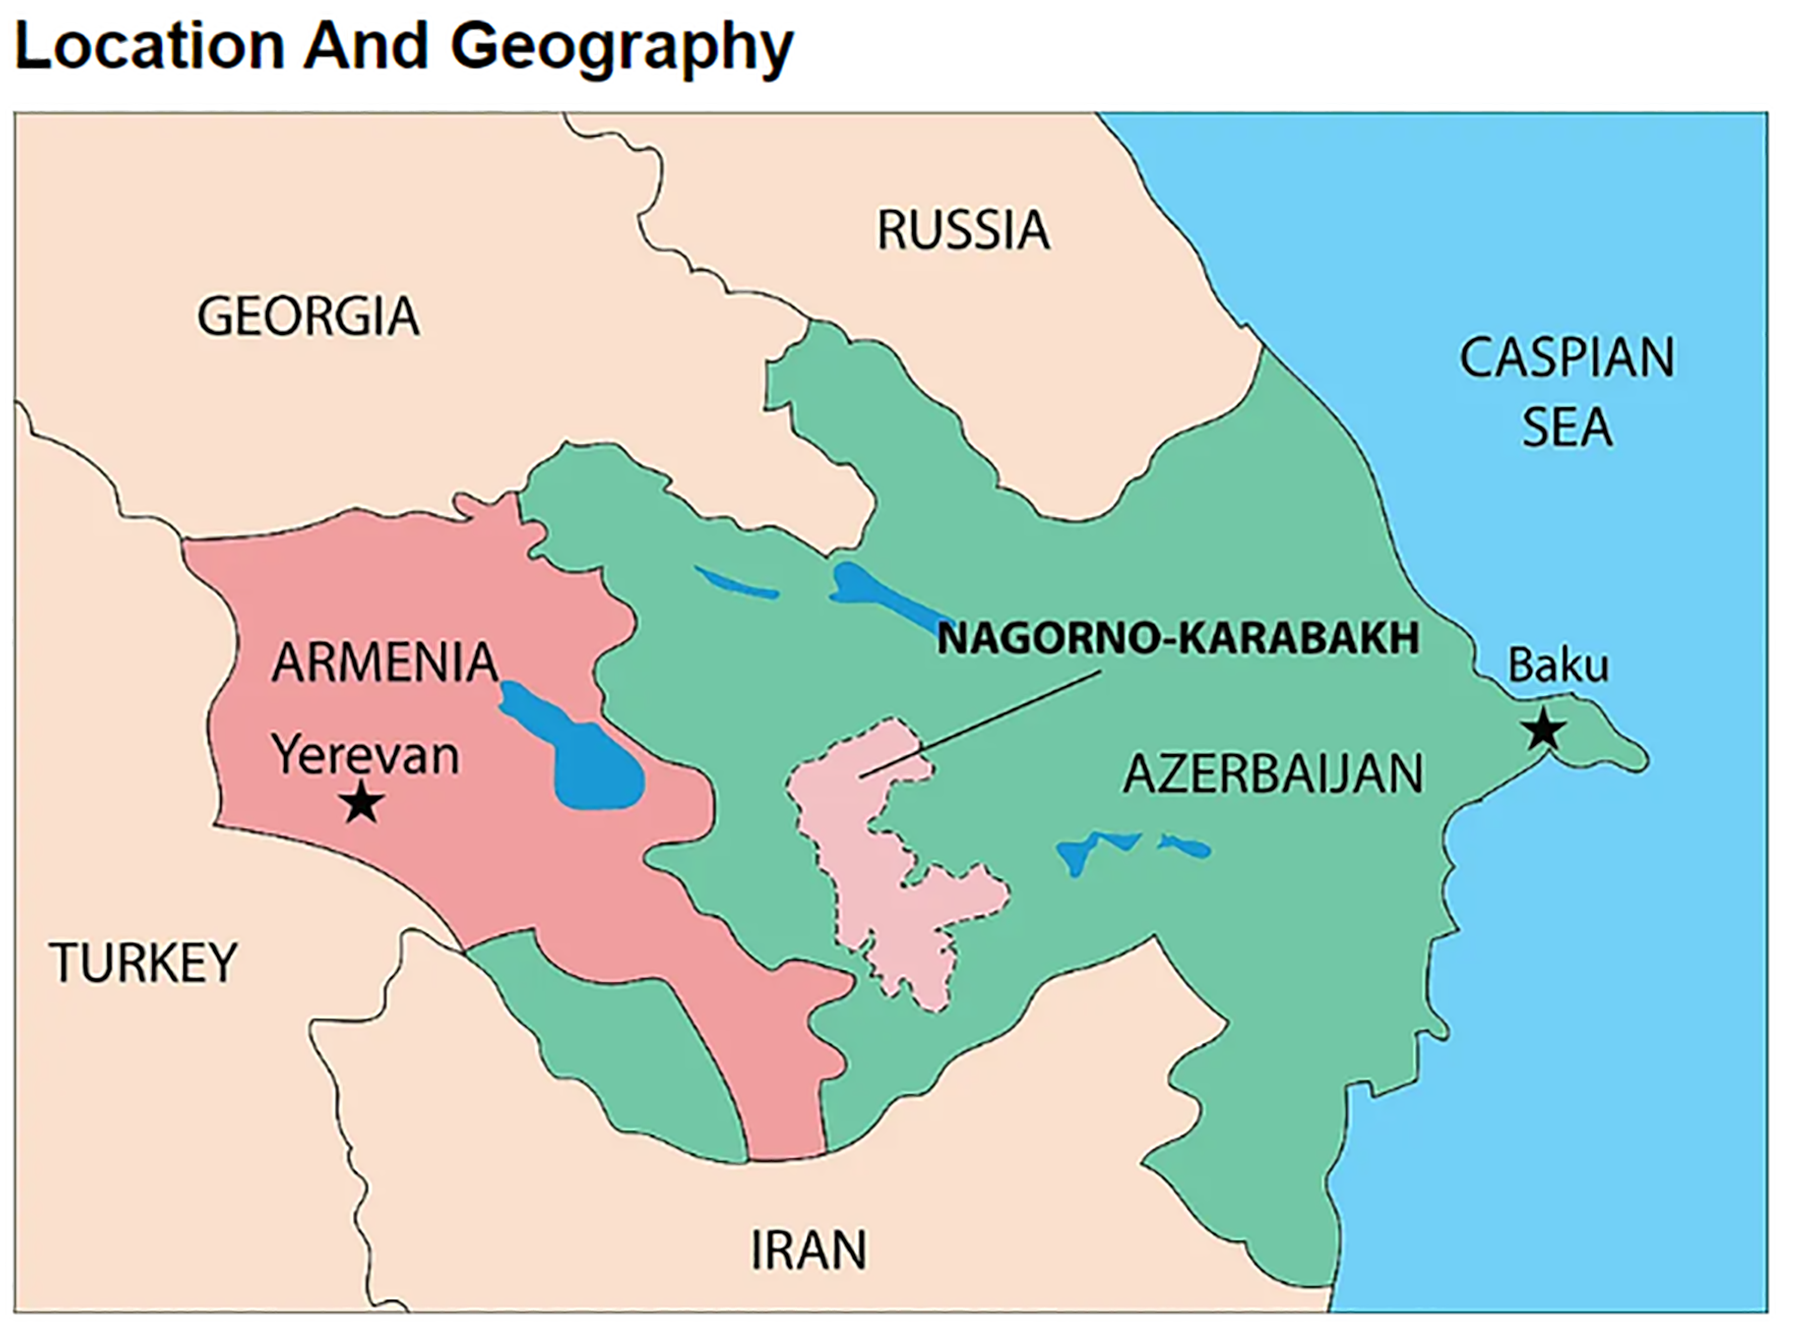 We will not give away our land': Armenians near Azerbaijan exclave, News